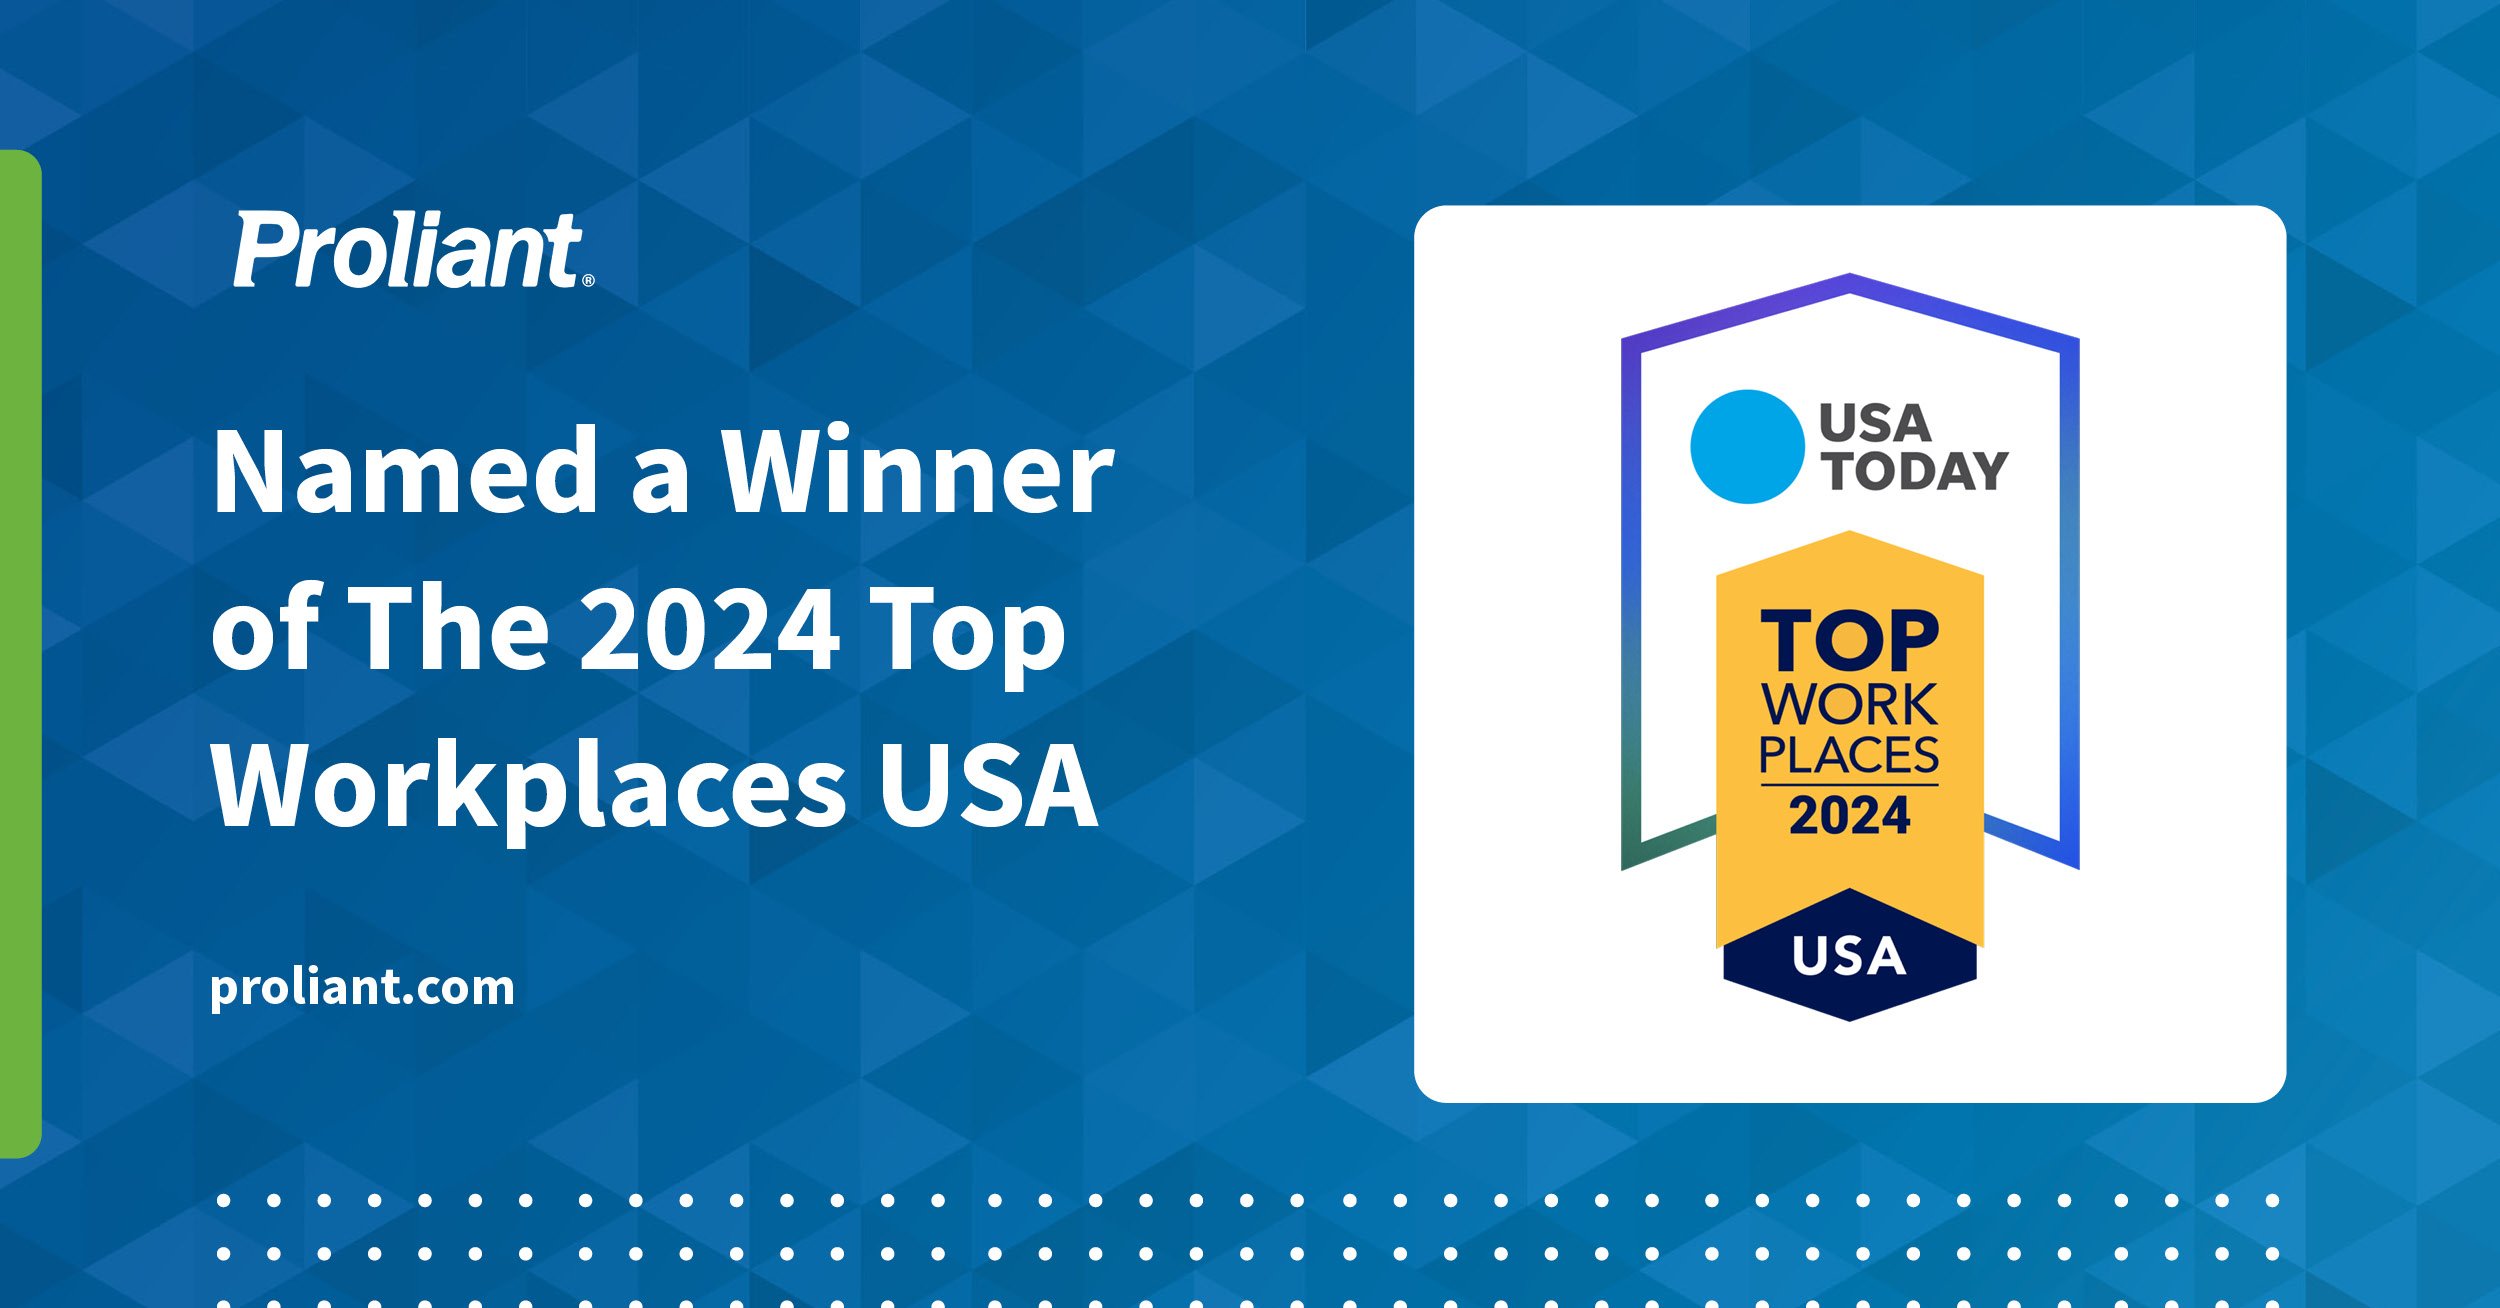 Proliant Named a Winner of The 2024 Top Workplaces USA